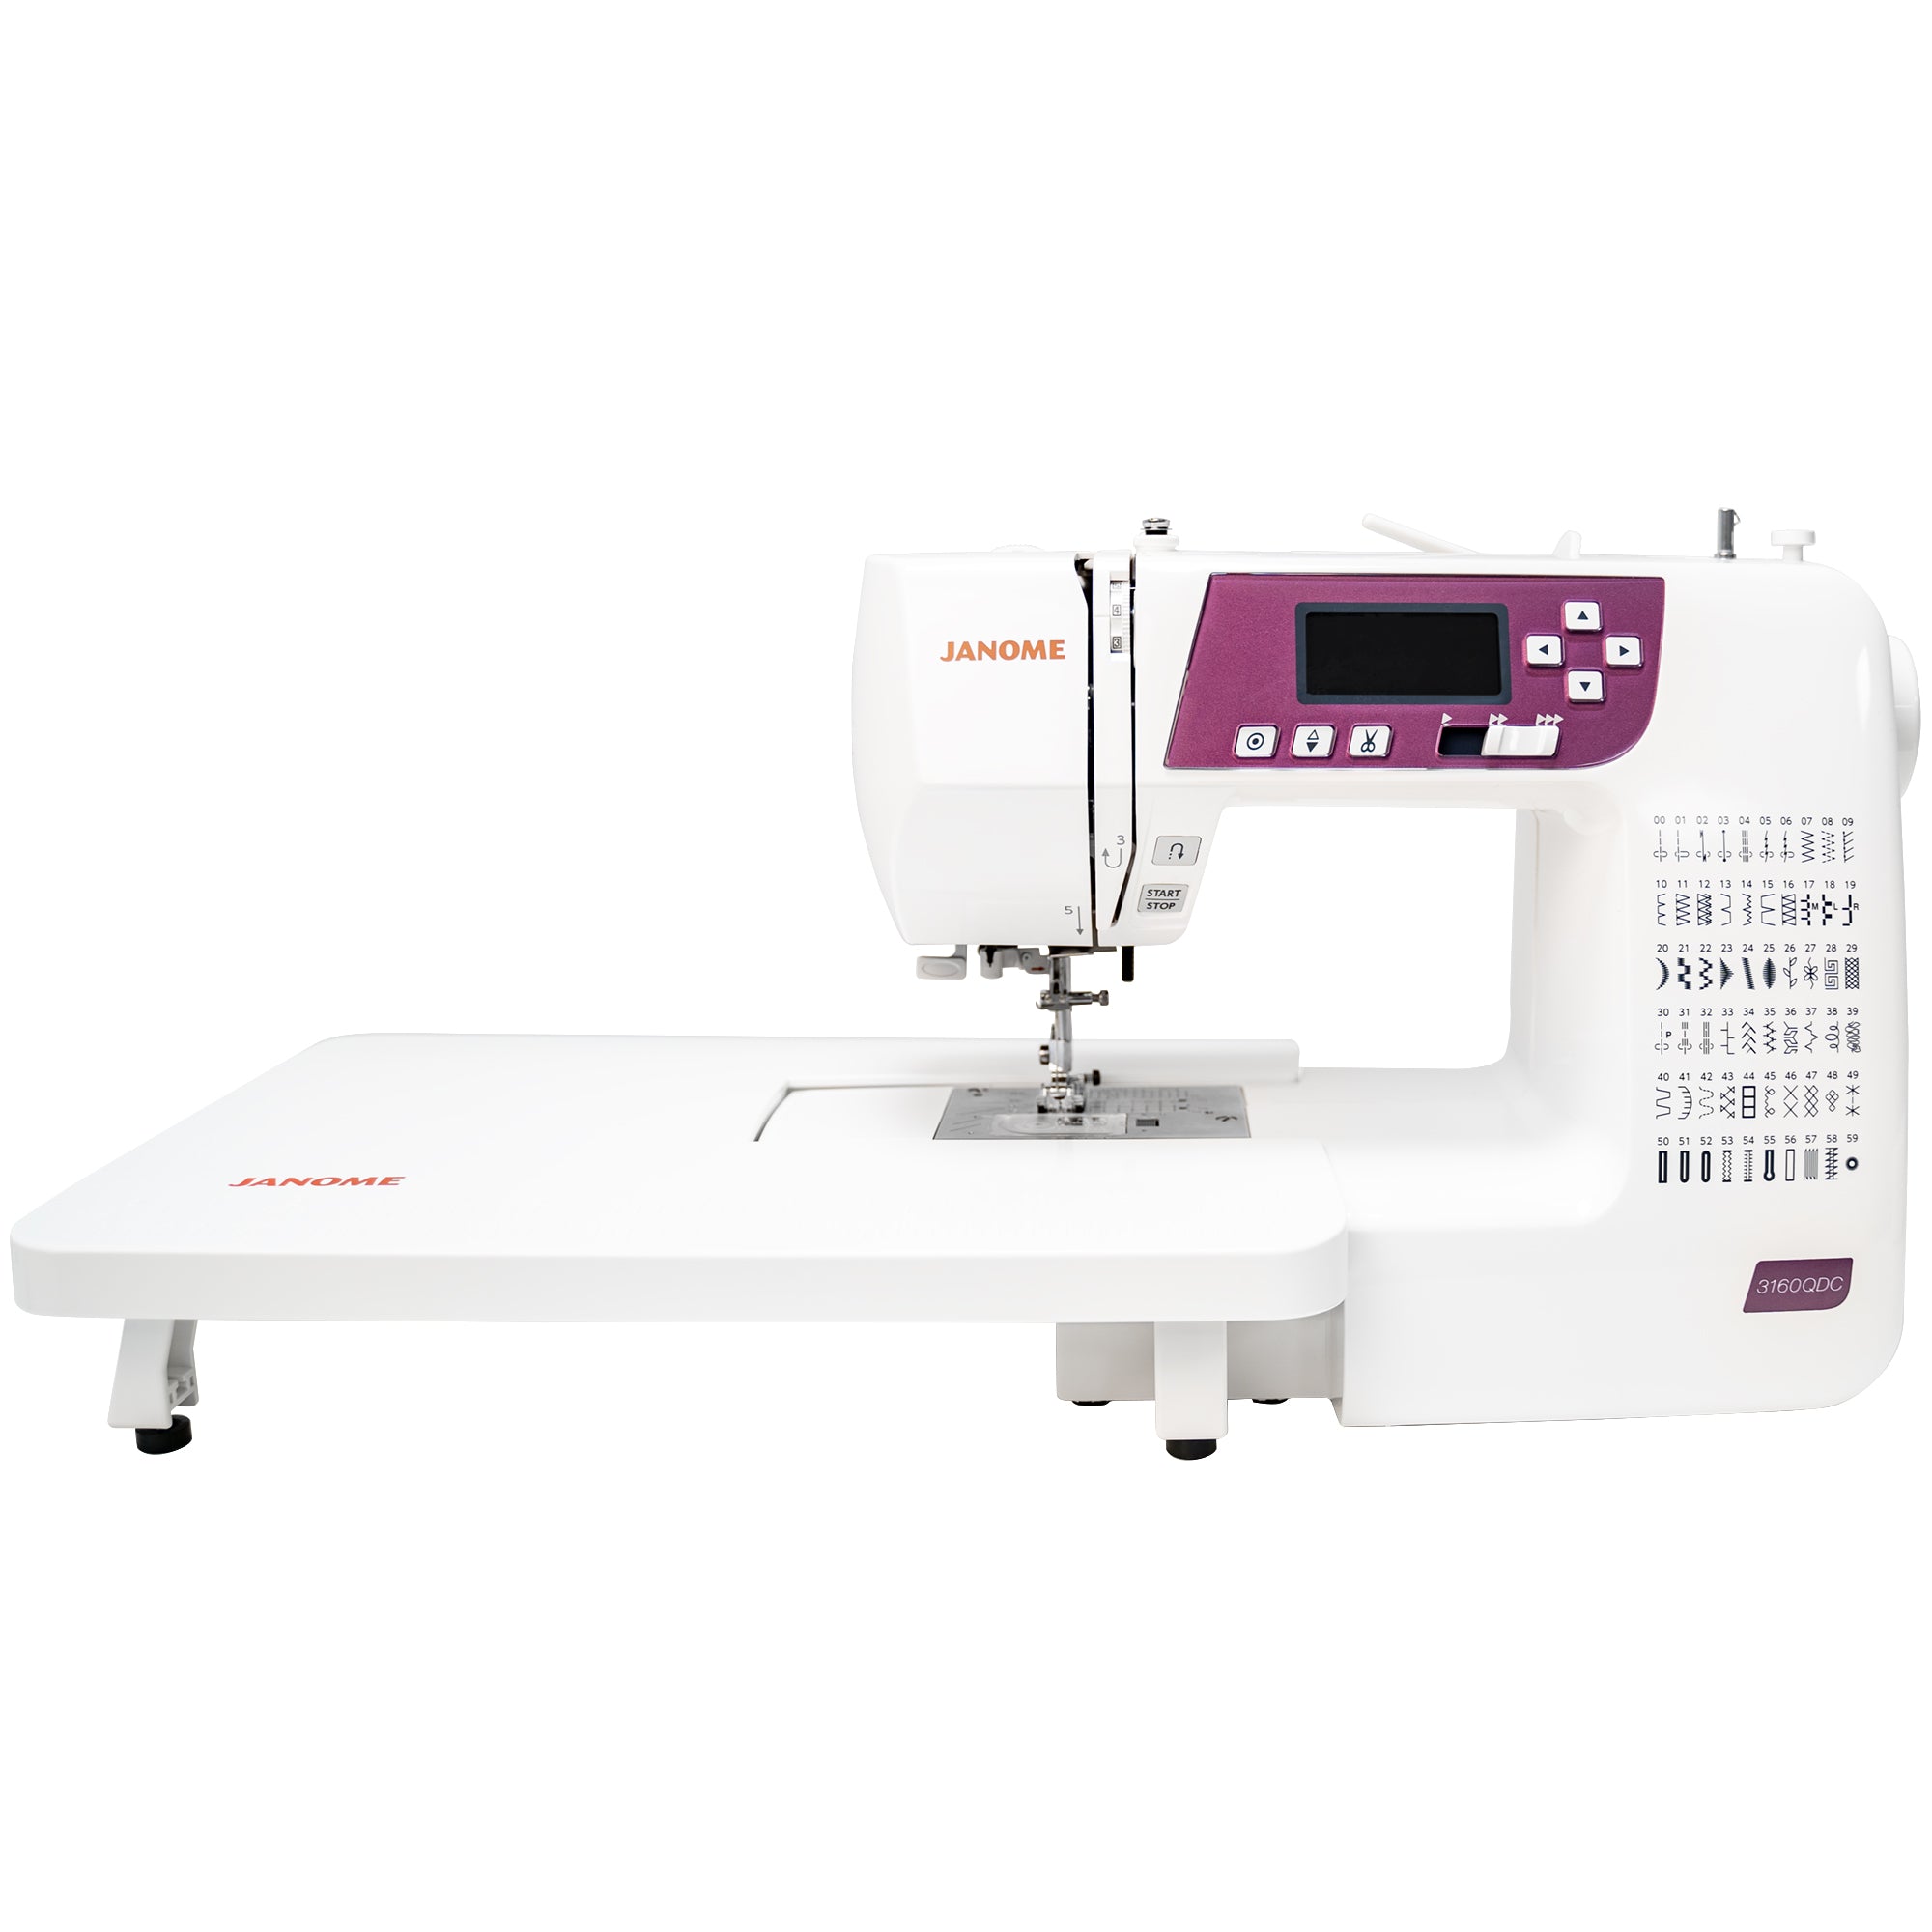 front facing image of the Janome 3160QDC-G Sewing and Quilting Machine with table attached